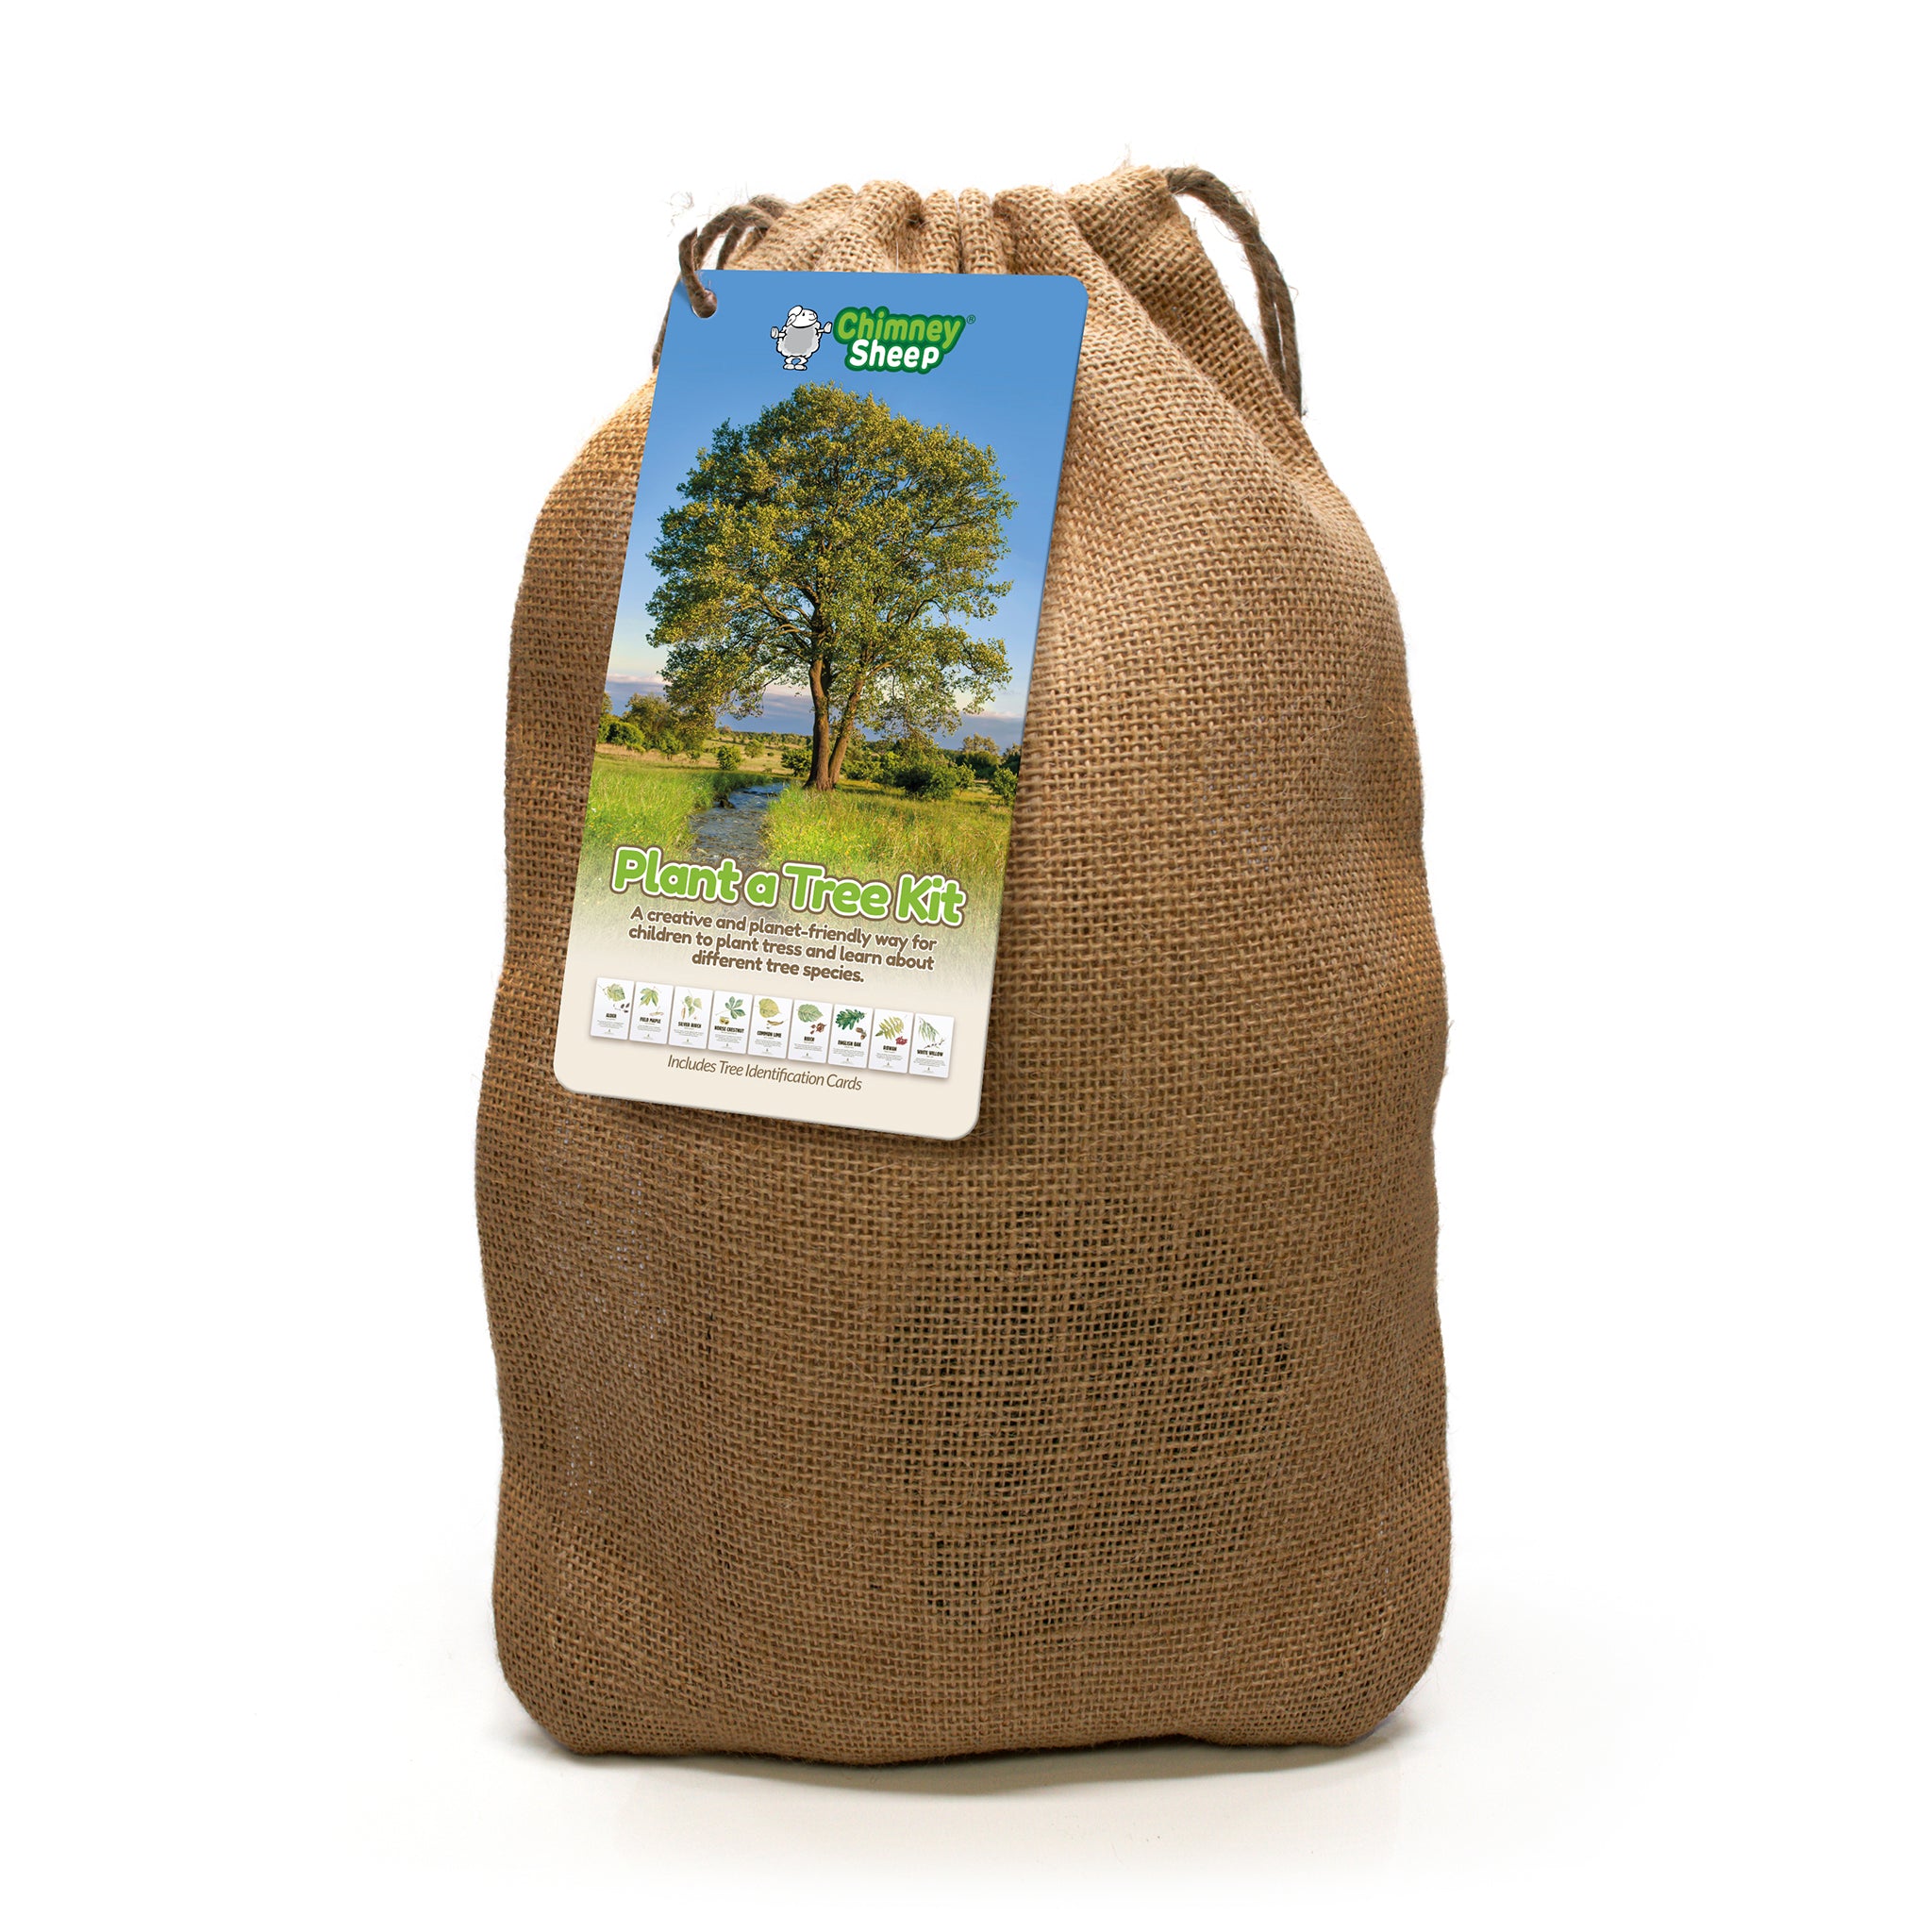 Plant a tree kit, housed inside a hessian bag, up against a white background